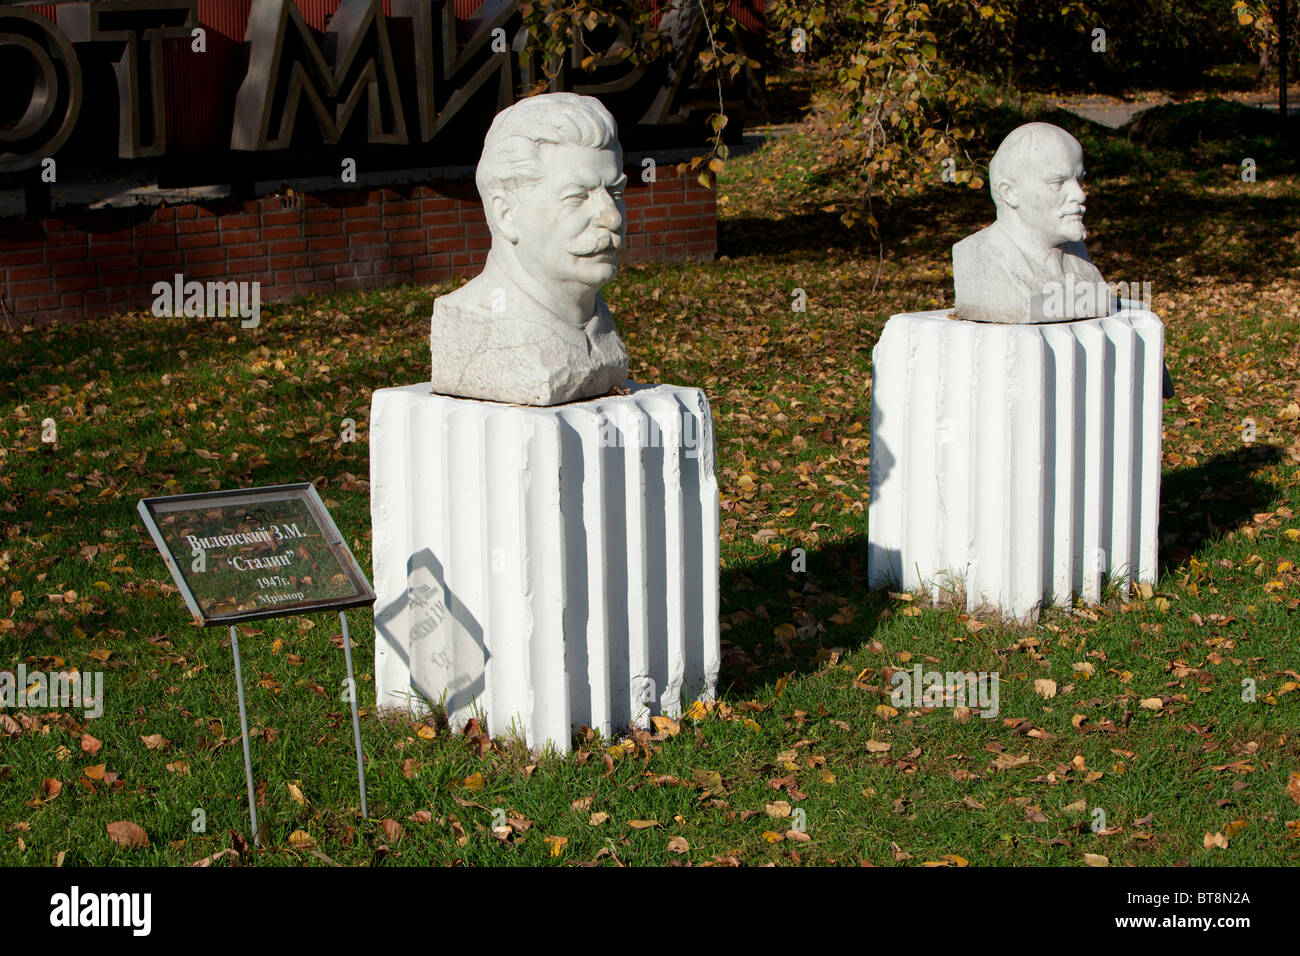 Busts of the communist leaders Stalin (1878-1953) and Lenin (1870-1924) at the Fallen Monument Park (Muzeon Park of Arts) in Moscow, Russia Stock Photo